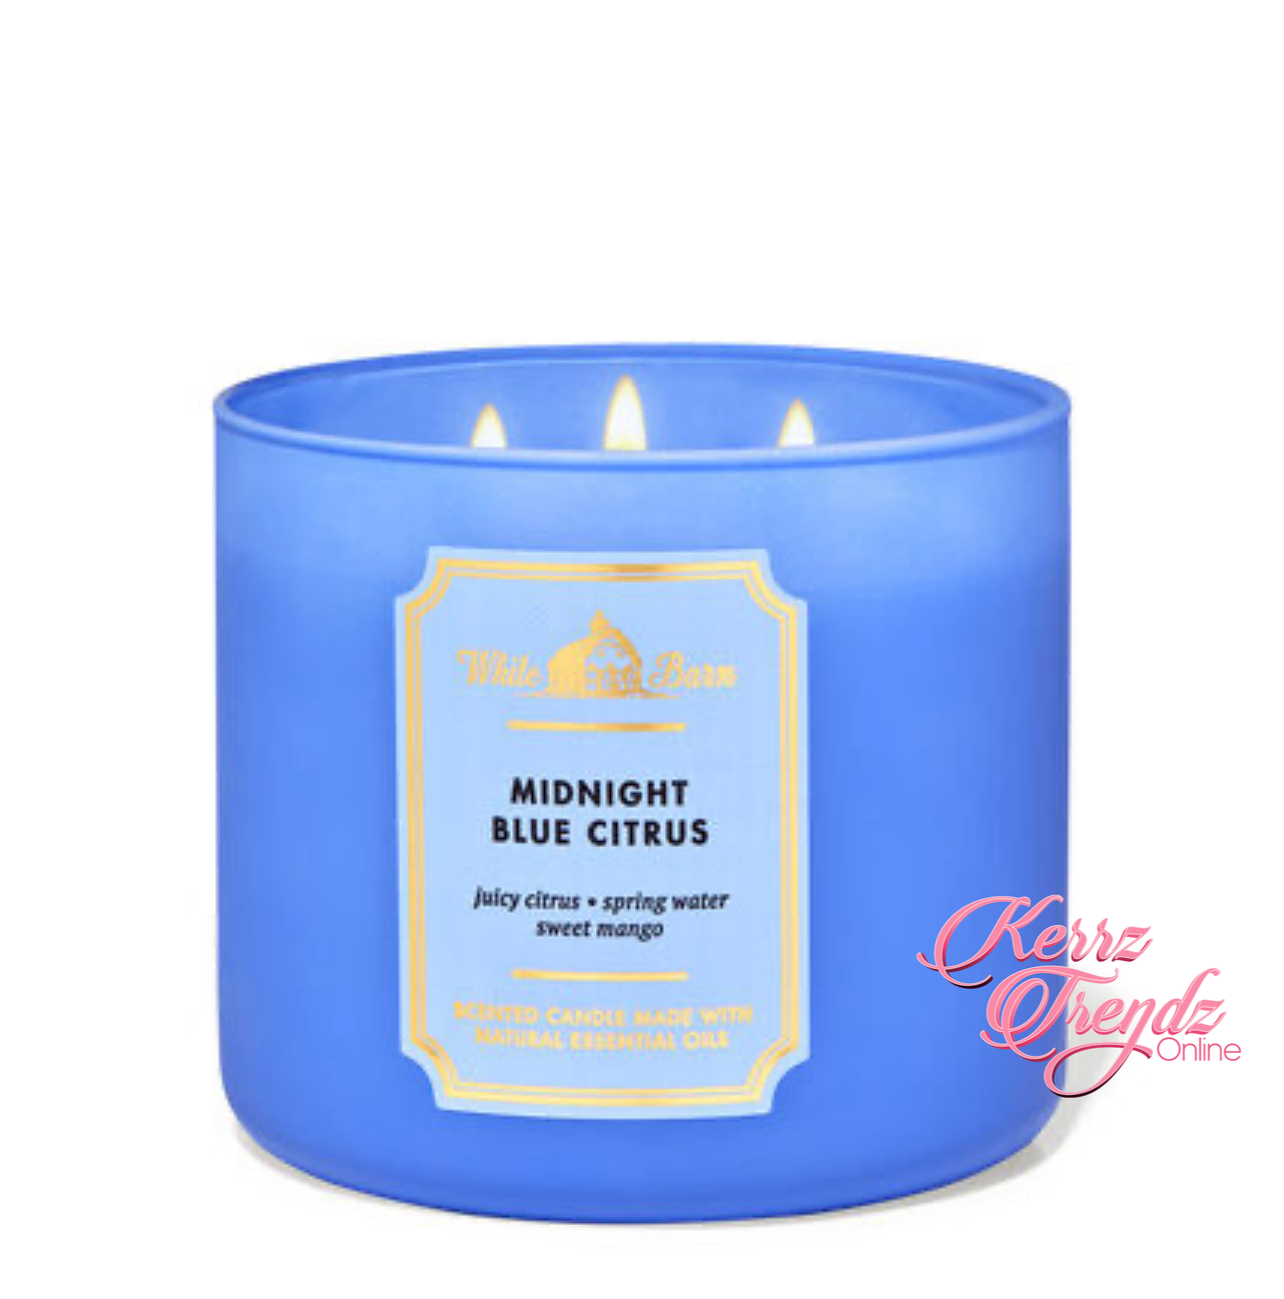 Midnight Blue Citrus 3 Wick Candle